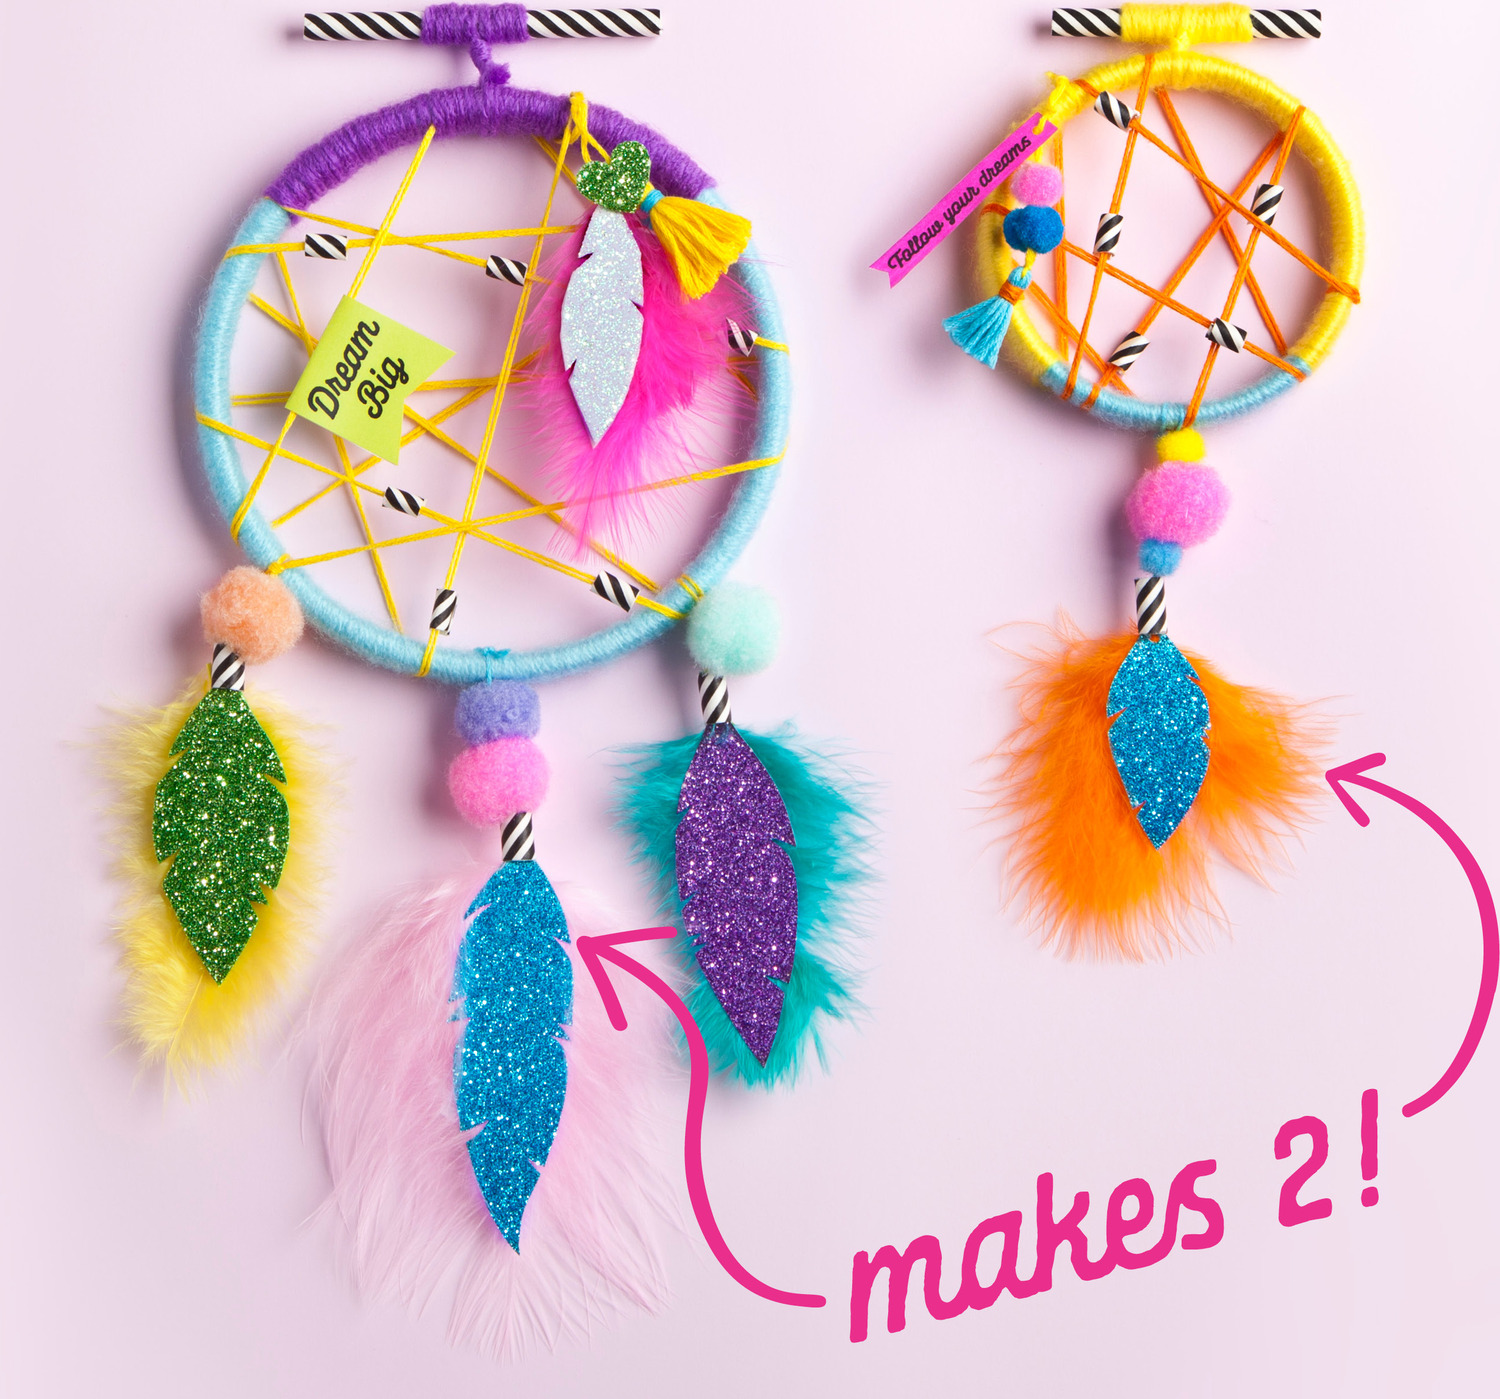 Set of 2 Large Make Your Own Dream Catcher Arts & Craft Kits 